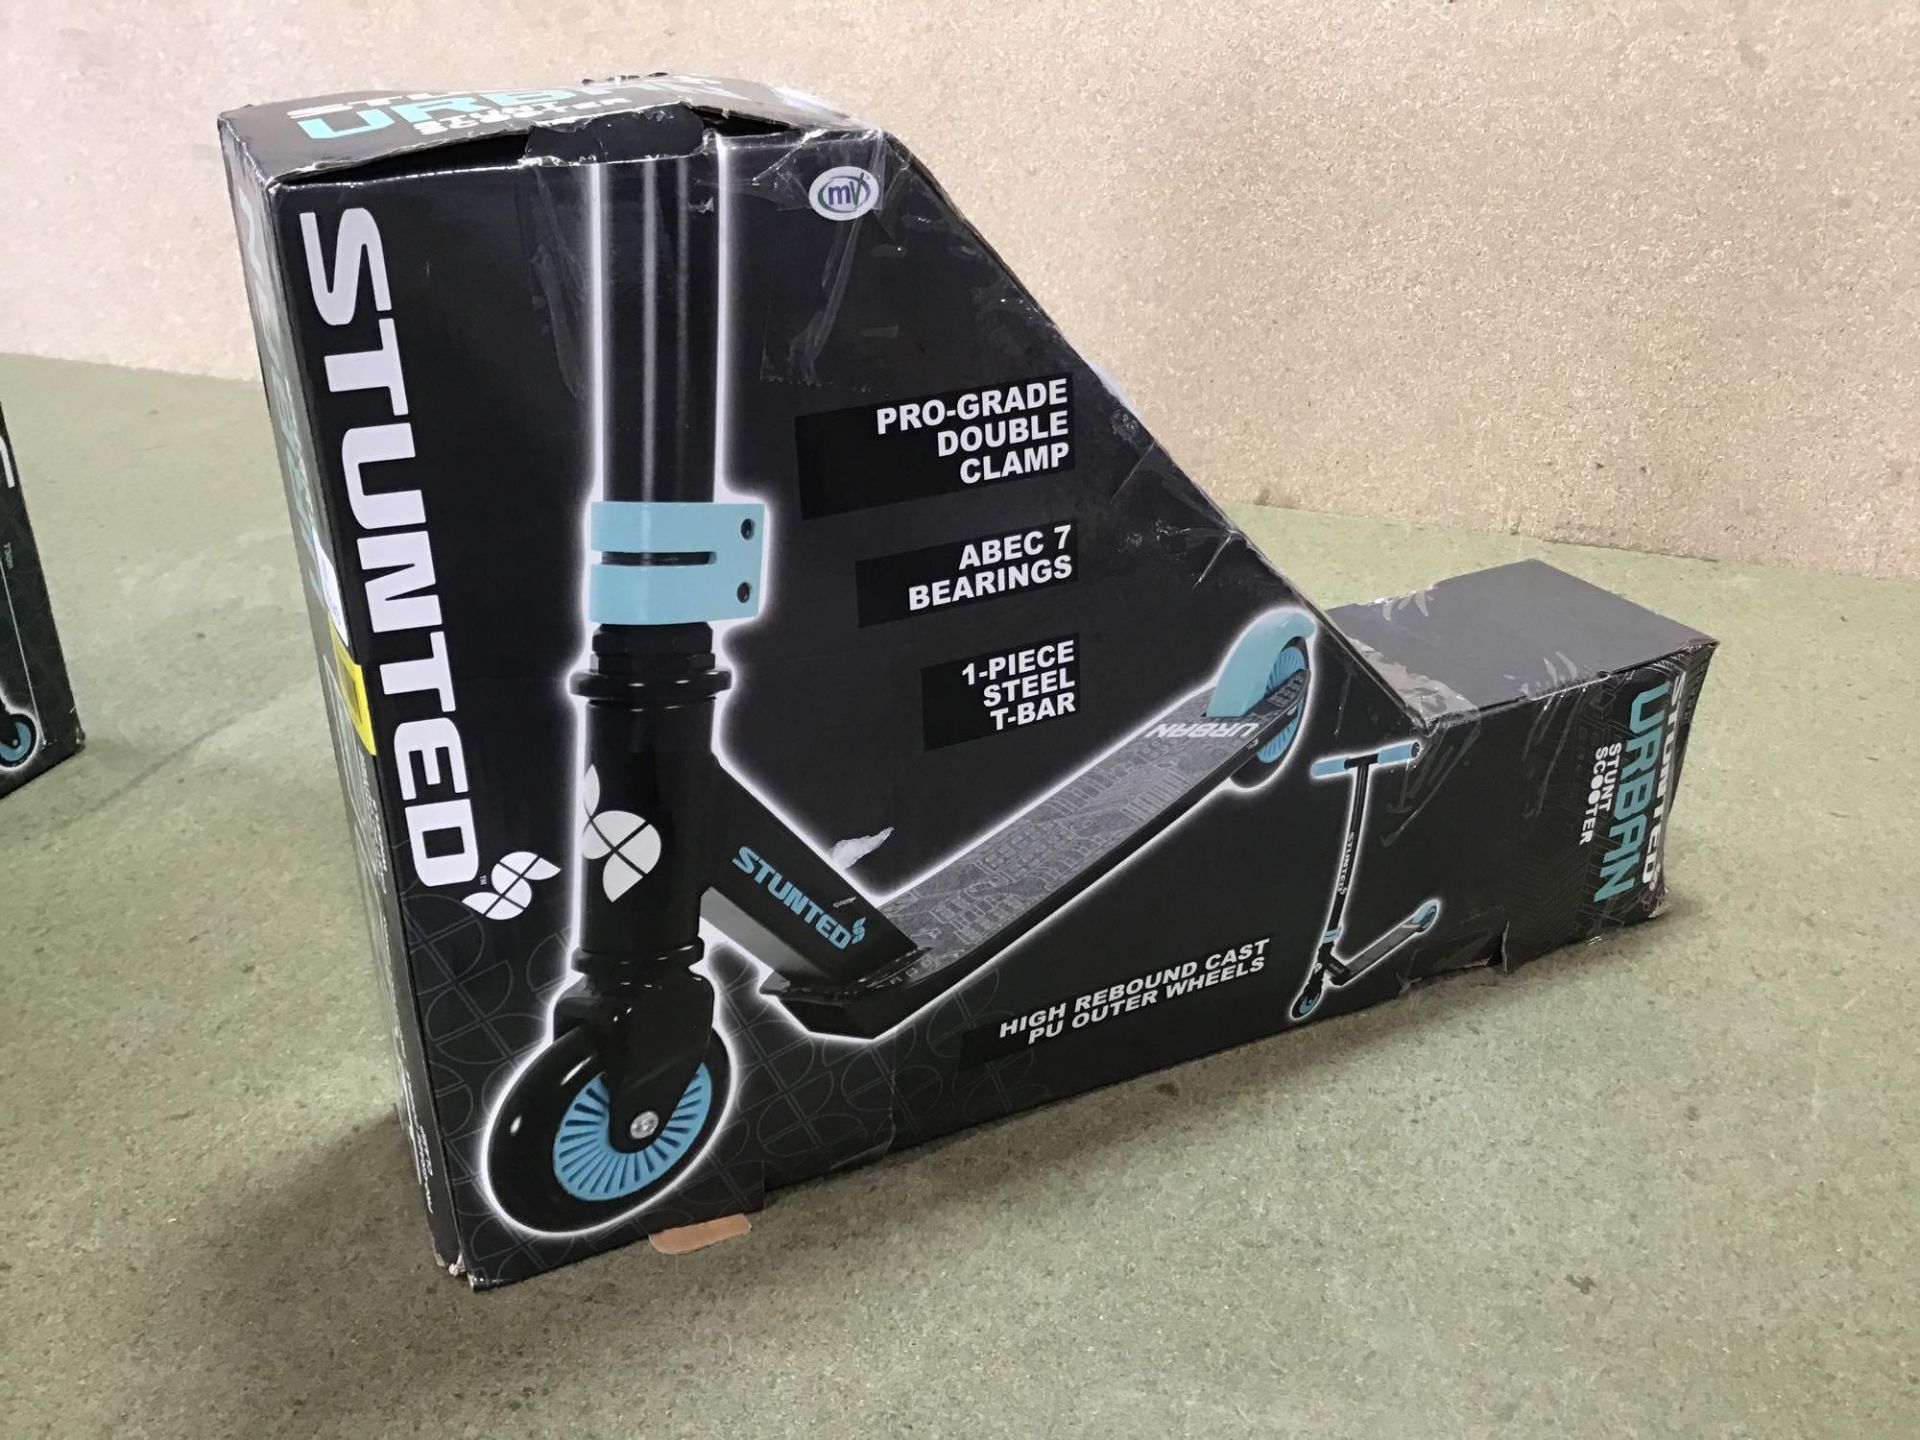 Stunted Urban Stunt Scooter 912/6875 - £22.99 RRP - Image 2 of 4